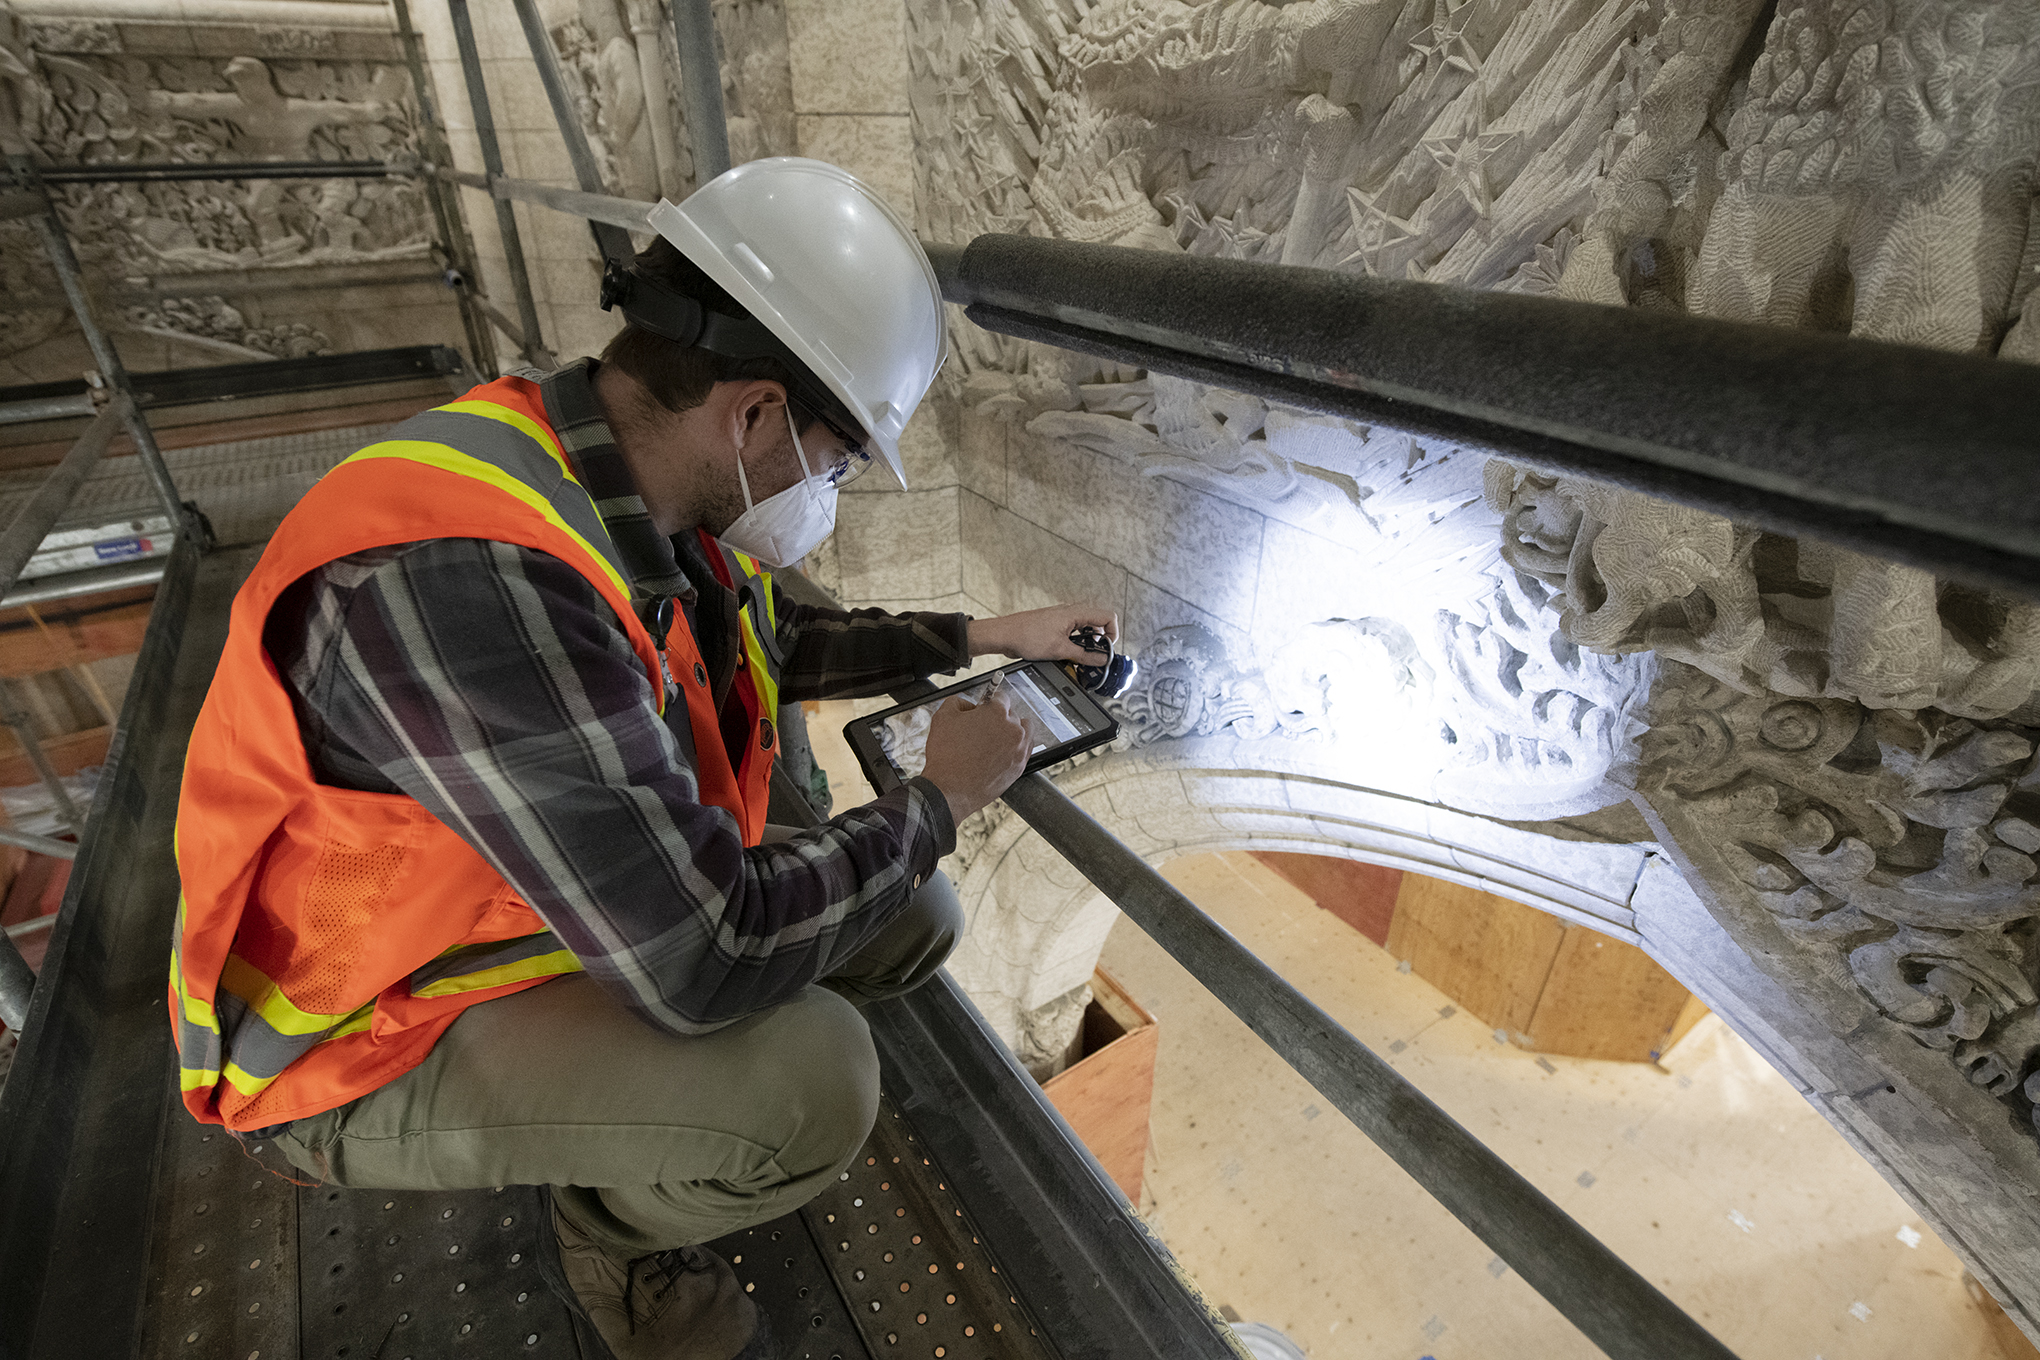 A man in a hardhat on scaffolding looks at carved stone and consults a tablet computer.